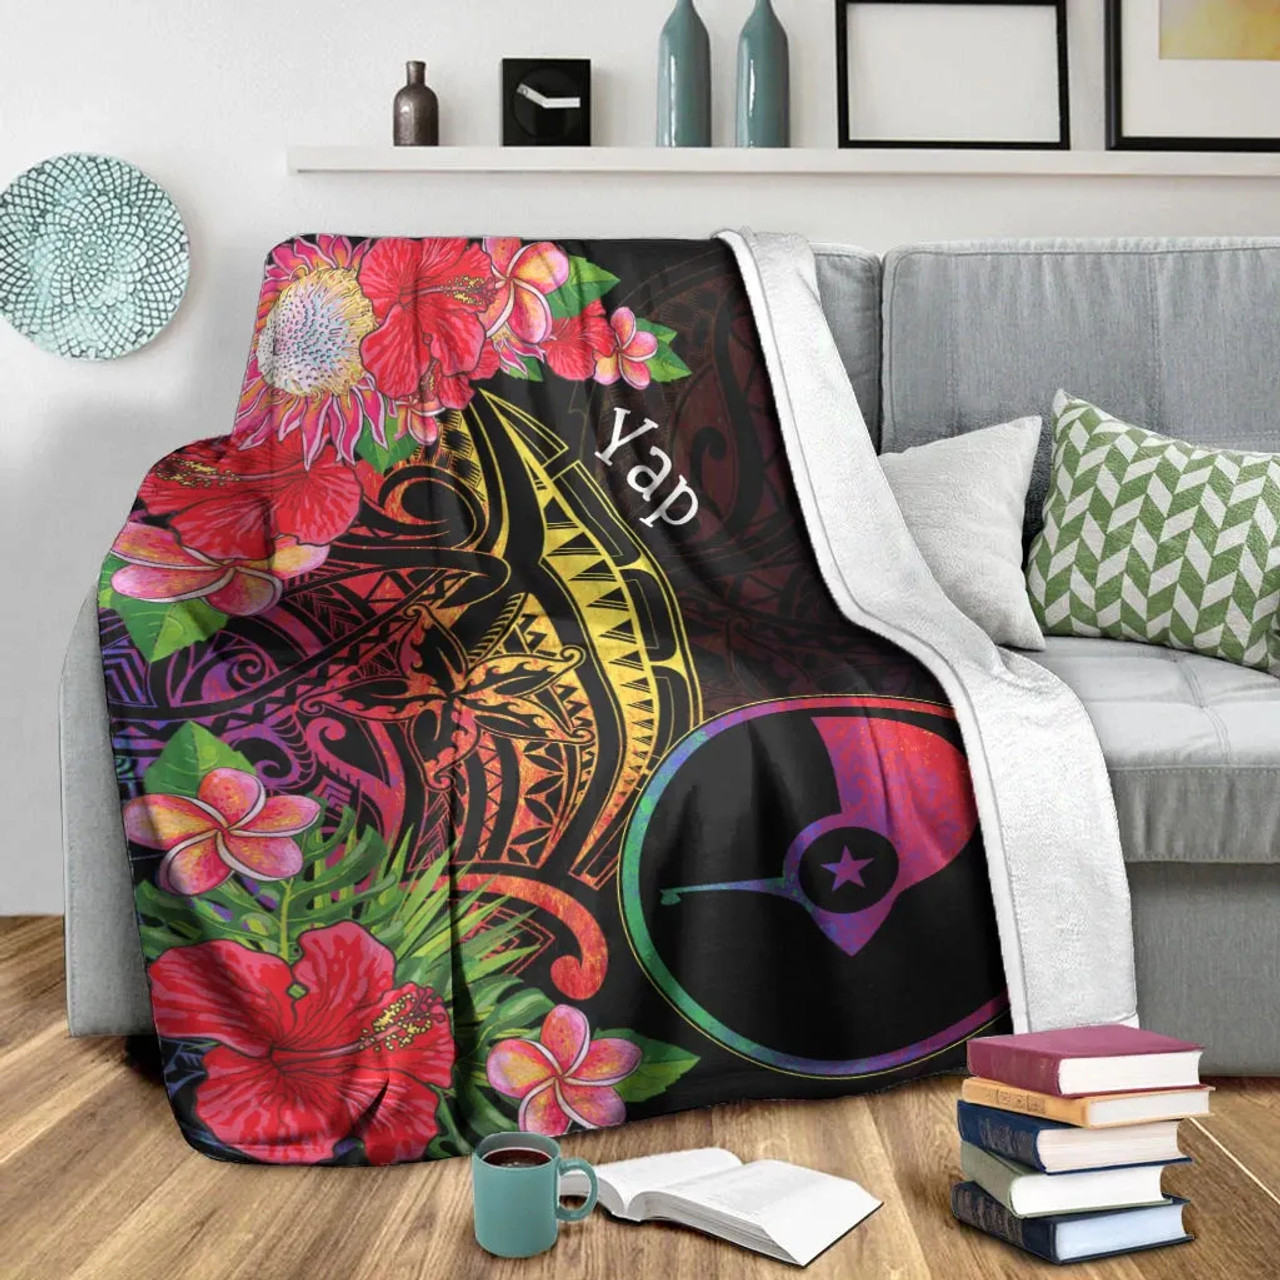 Yap State Premium Blanket - Tropical Hippie Style 3